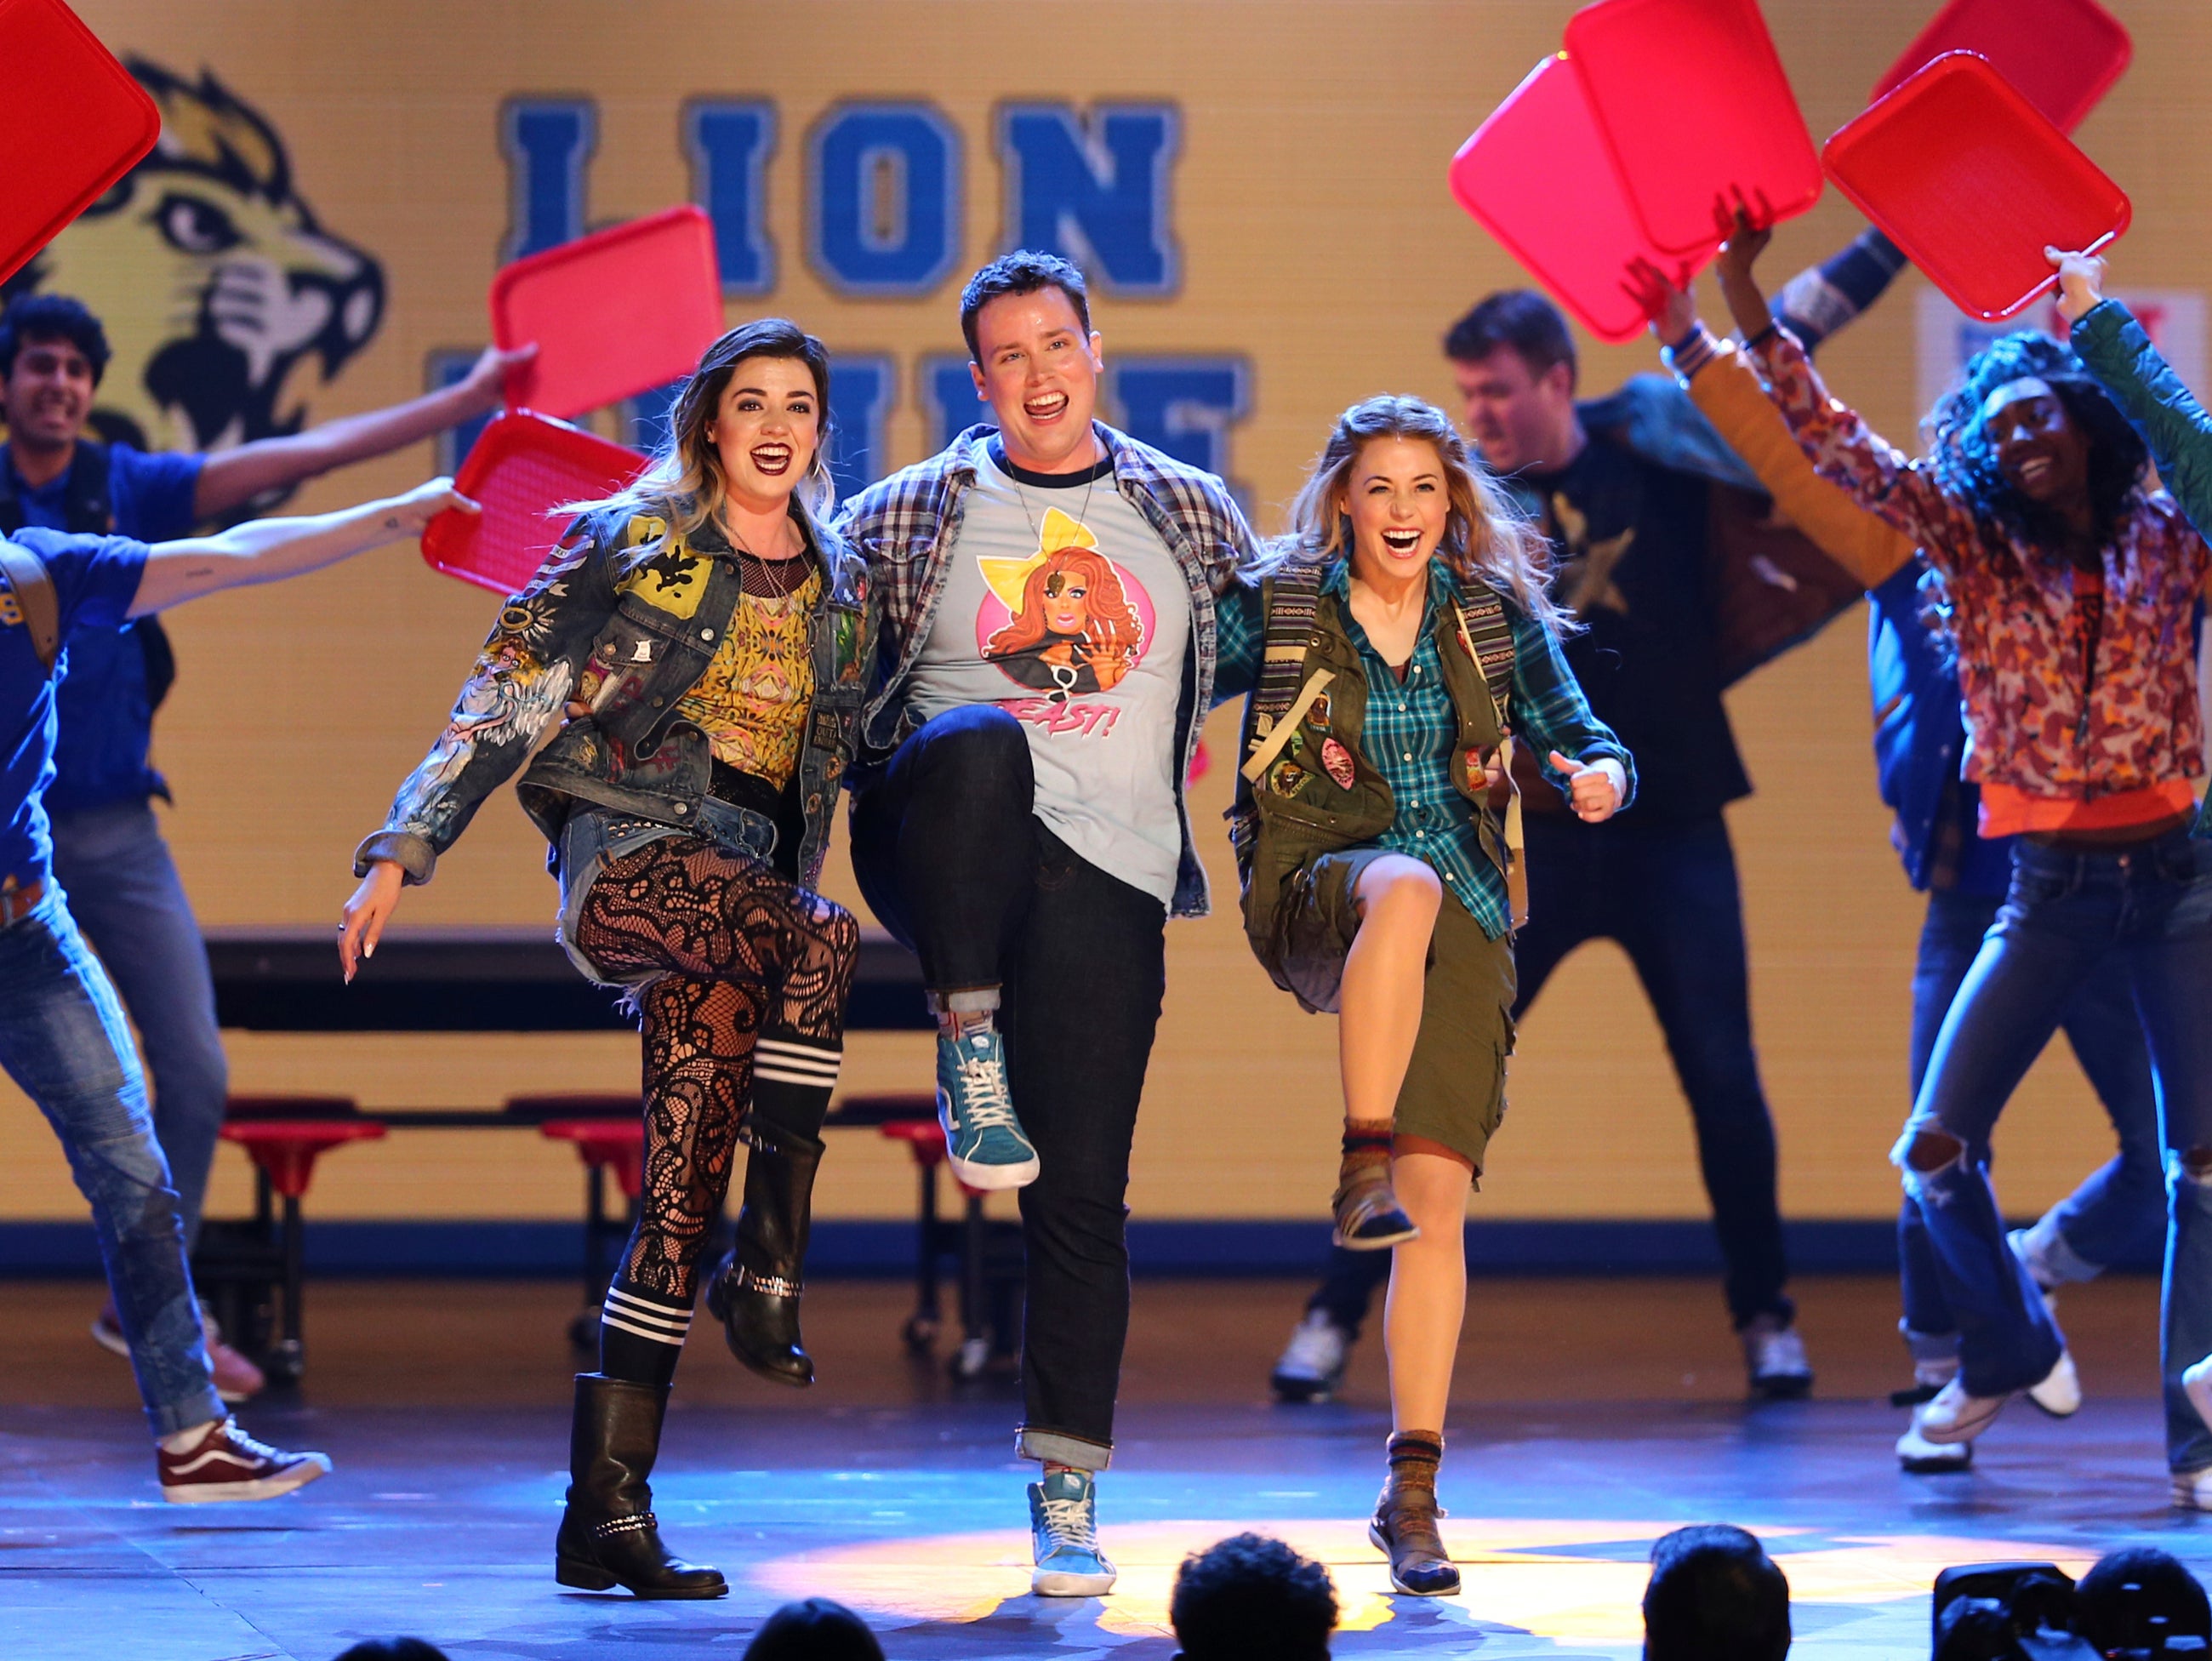 The cast of Mean Girls performs at the 72nd Tony Awards on 10 June 2018, in New York